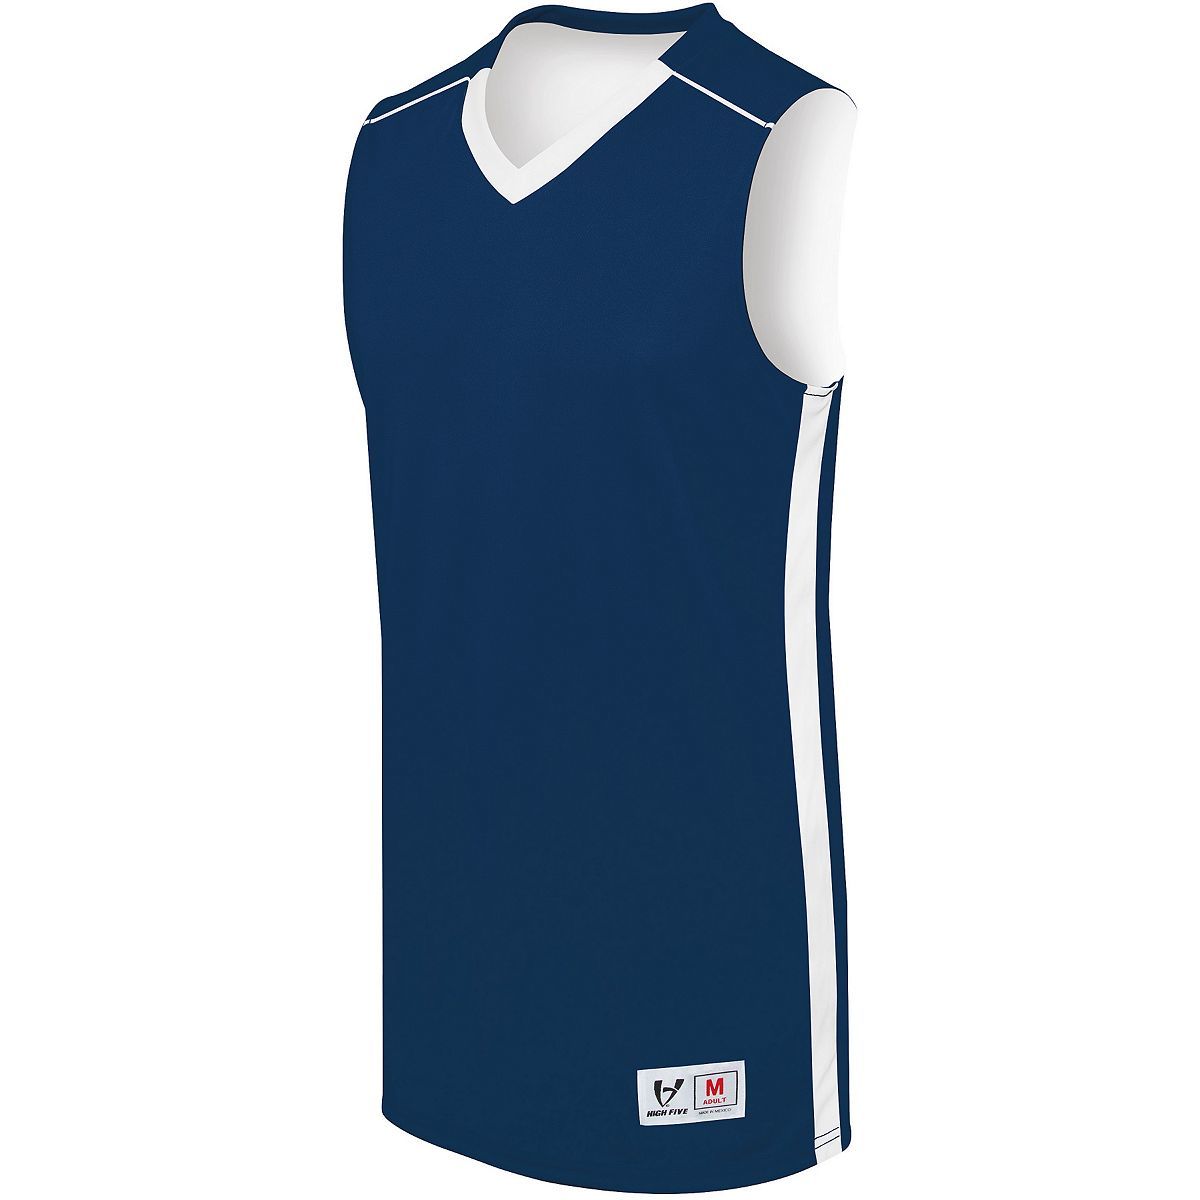 Augusta Sportswear Ladies Competition Reversible Jersey in Navy/White  -Part of the Ladies, Ladies-Jersey, Augusta-Products, Basketball, Shirts, All-Sports, All-Sports-1 product lines at KanaleyCreations.com